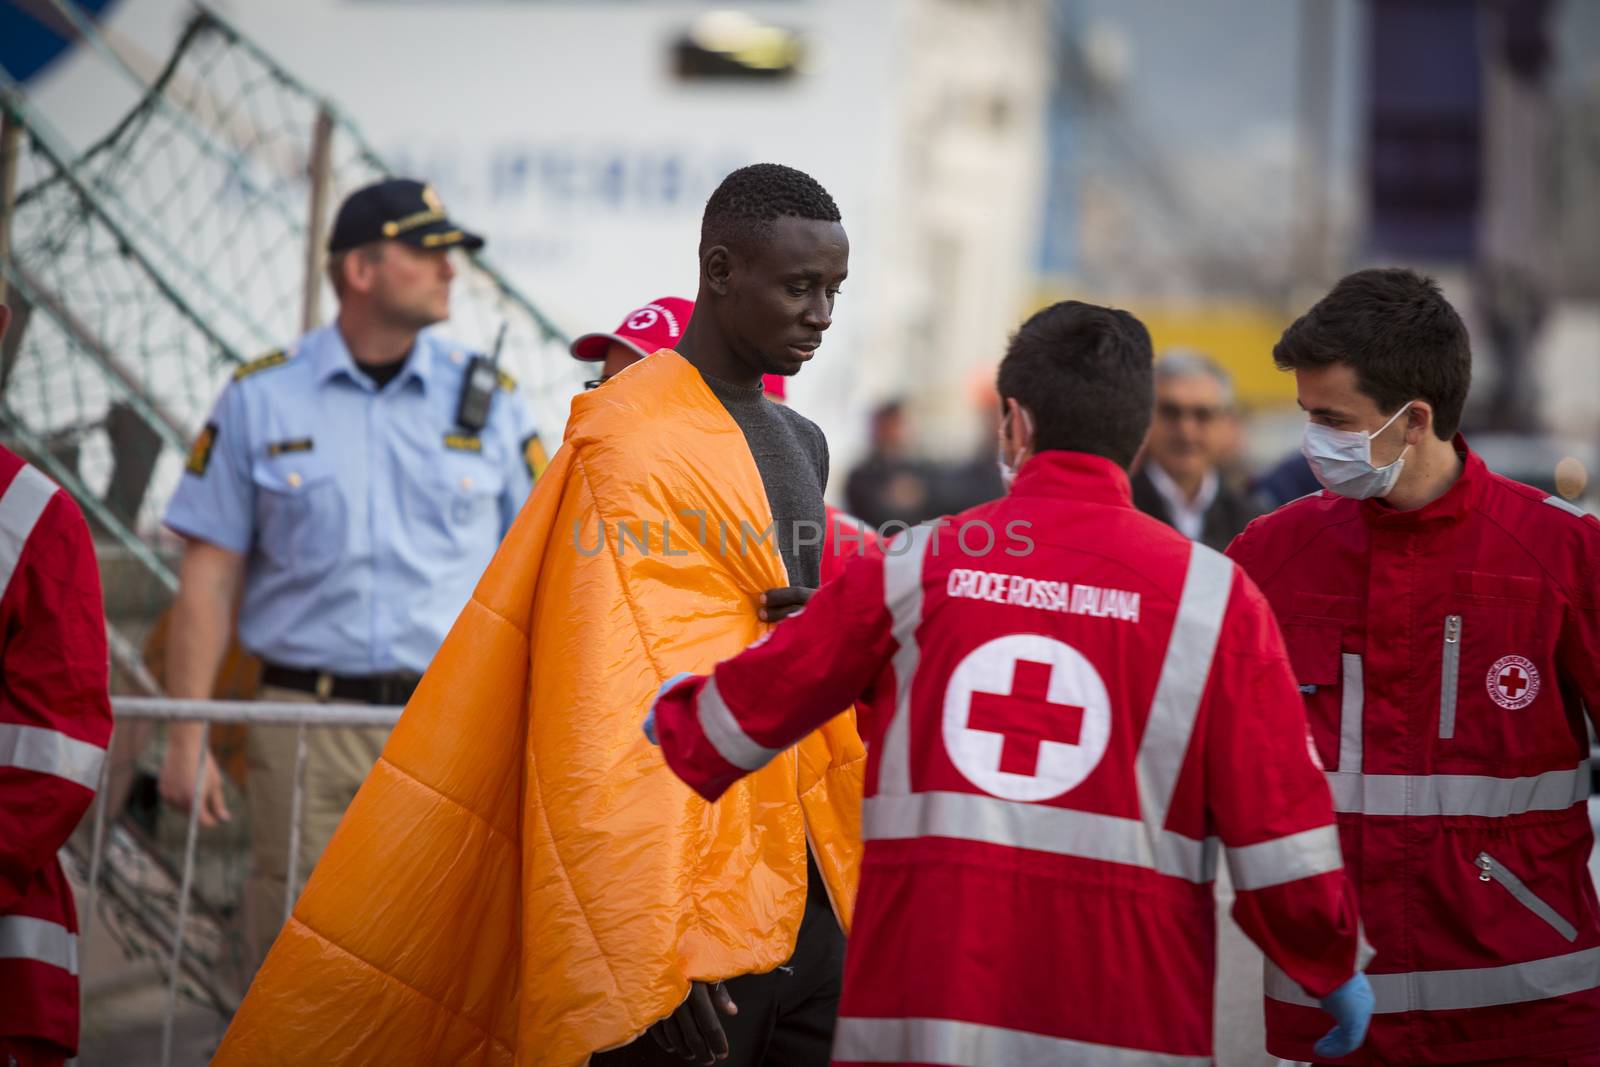 ITALY, Palermo: At least 890 migrants and refugees mostly from North Africa disembark from Siem Pilot, a Norwegian-flagged ship taking part in the Frontex mission, on April 13, 2016 in Palermo harbour, in Sicily, according to local media. Italy's coastguard said on April 12, 2016 it had rescued some 4,000 migrants in the past two days, adding to fears of a fresh push to reach Europe via that route as the number of migrants landing in Greece sharply recedes.